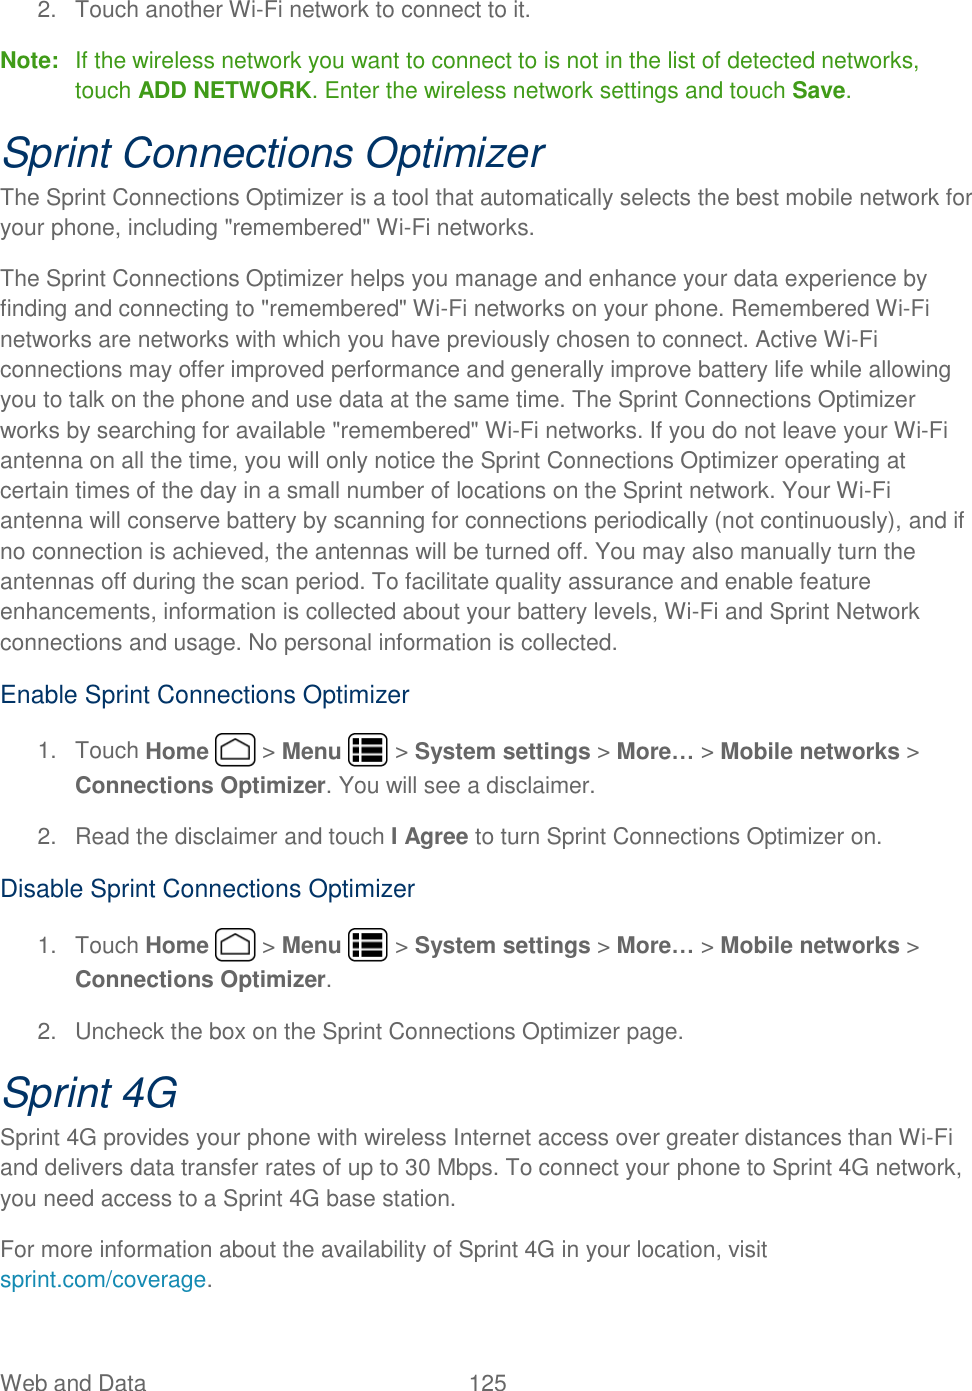 Web and Data  125   2.  Touch another Wi-Fi network to connect to it. Note:  If the wireless network you want to connect to is not in the list of detected networks, touch ADD NETWORK. Enter the wireless network settings and touch Save. Sprint Connections Optimizer The Sprint Connections Optimizer is a tool that automatically selects the best mobile network for your phone, including &quot;remembered&quot; Wi-Fi networks. The Sprint Connections Optimizer helps you manage and enhance your data experience by finding and connecting to &quot;remembered&quot; Wi-Fi networks on your phone. Remembered Wi-Fi networks are networks with which you have previously chosen to connect. Active Wi-Fi connections may offer improved performance and generally improve battery life while allowing you to talk on the phone and use data at the same time. The Sprint Connections Optimizer works by searching for available &quot;remembered&quot; Wi-Fi networks. If you do not leave your Wi-Fi antenna on all the time, you will only notice the Sprint Connections Optimizer operating at certain times of the day in a small number of locations on the Sprint network. Your Wi-Fi antenna will conserve battery by scanning for connections periodically (not continuously), and if no connection is achieved, the antennas will be turned off. You may also manually turn the antennas off during the scan period. To facilitate quality assurance and enable feature enhancements, information is collected about your battery levels, Wi-Fi and Sprint Network connections and usage. No personal information is collected. Enable Sprint Connections Optimizer 1.  Touch Home   &gt; Menu   &gt; System settings &gt; More… &gt; Mobile networks &gt; Connections Optimizer. You will see a disclaimer. 2.  Read the disclaimer and touch I Agree to turn Sprint Connections Optimizer on. Disable Sprint Connections Optimizer 1.  Touch Home   &gt; Menu   &gt; System settings &gt; More… &gt; Mobile networks &gt; Connections Optimizer. 2.  Uncheck the box on the Sprint Connections Optimizer page. Sprint 4G Sprint 4G provides your phone with wireless Internet access over greater distances than Wi-Fi and delivers data transfer rates of up to 30 Mbps. To connect your phone to Sprint 4G network, you need access to a Sprint 4G base station. For more information about the availability of Sprint 4G in your location, visit sprint.com/coverage. 